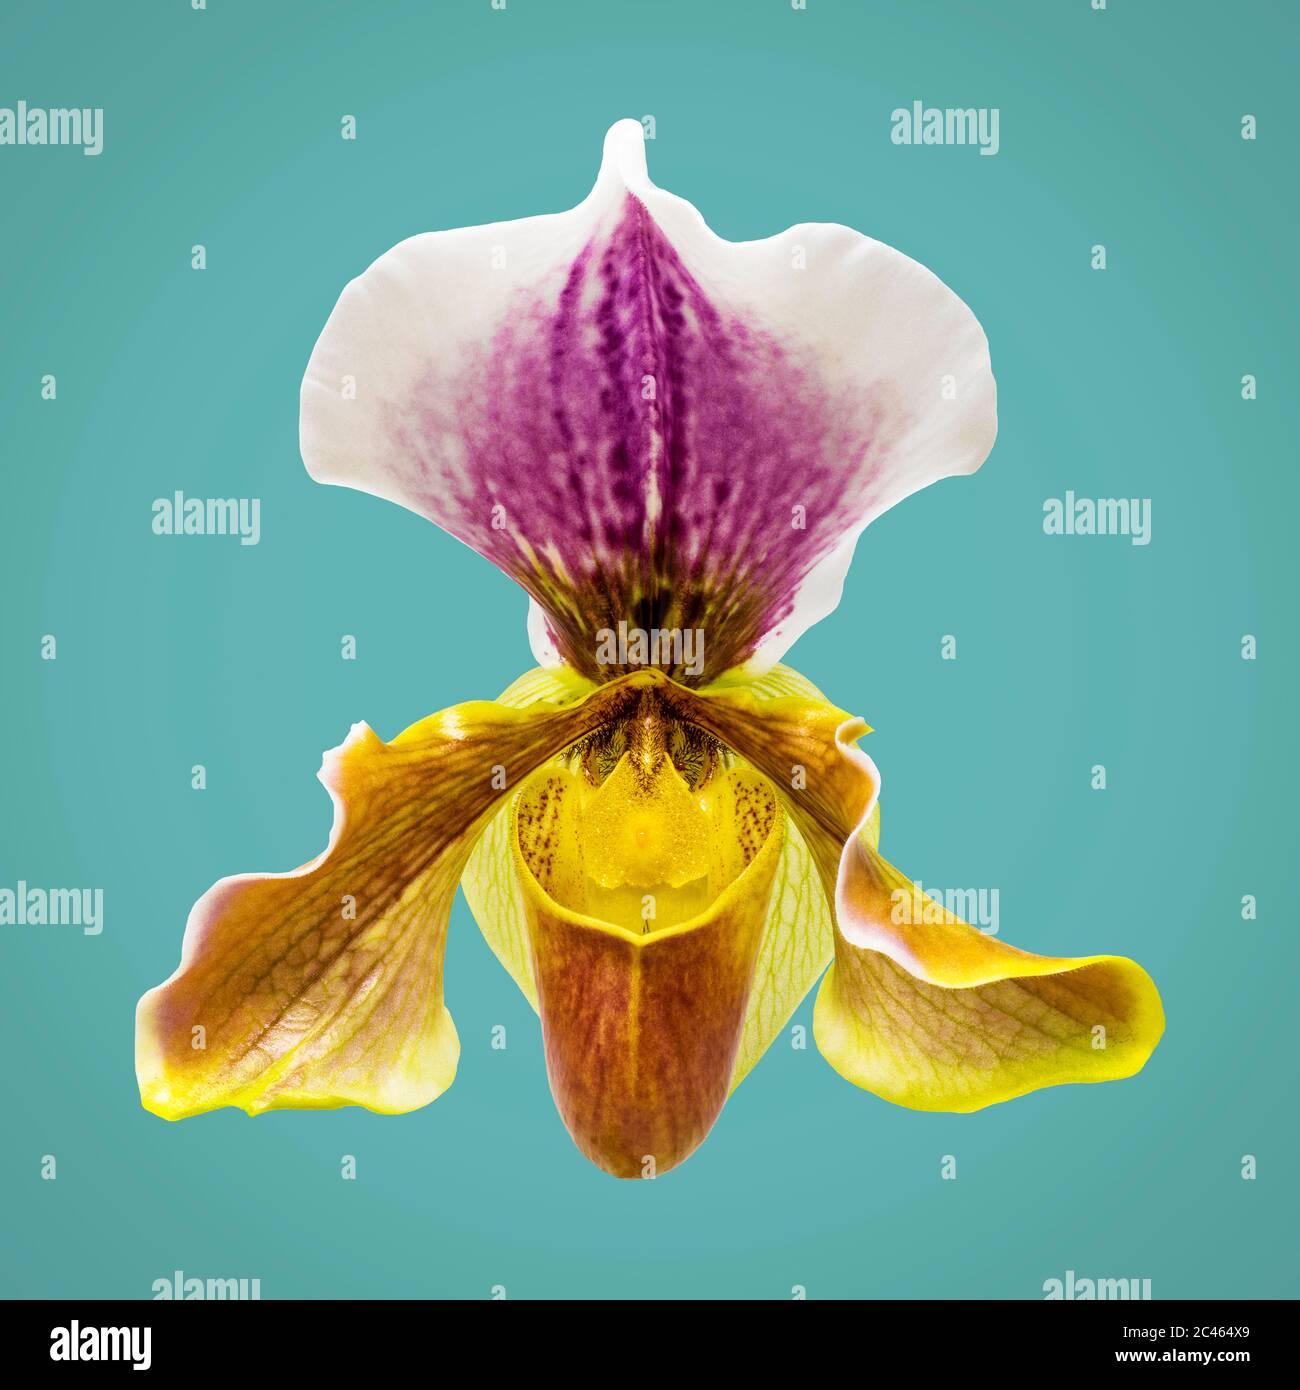 The beautiful flower of Paphiopedilum orchid, often called the Venus slipper. Macro photograph of a flower detail, isolated on blue background. Magnif Stock Photo